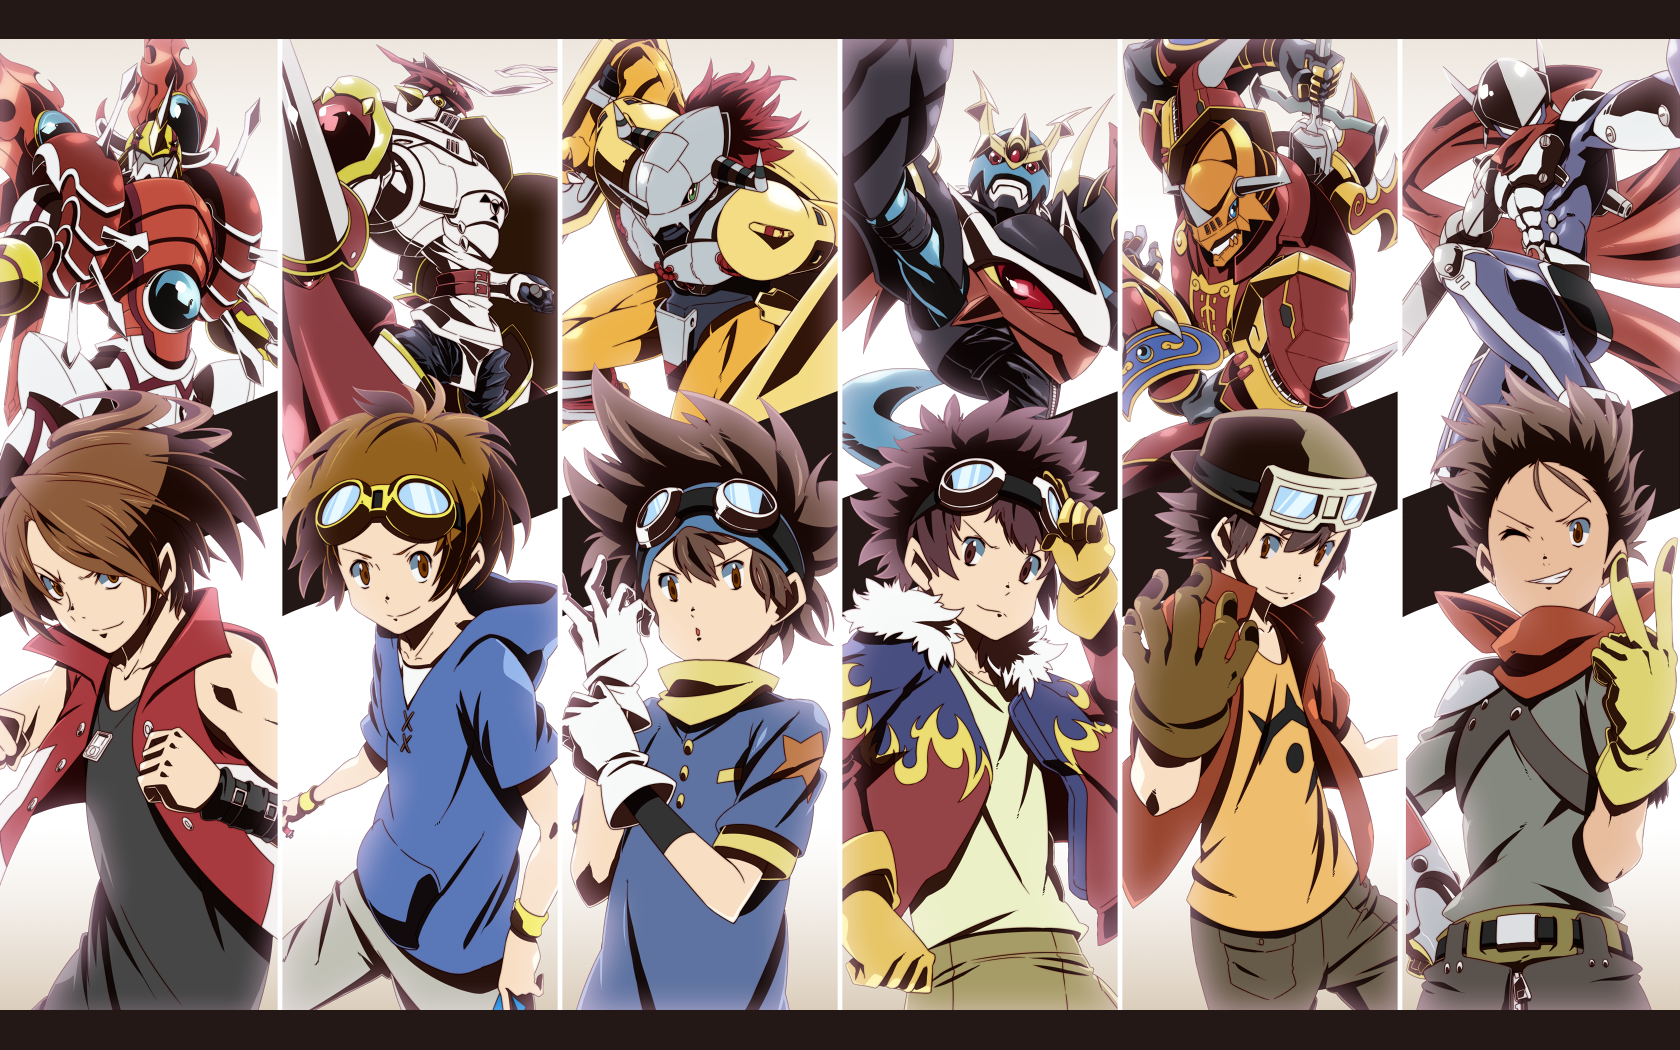 Anime 1680x1050 Digimon Frontier Digimon Tamers collage anime